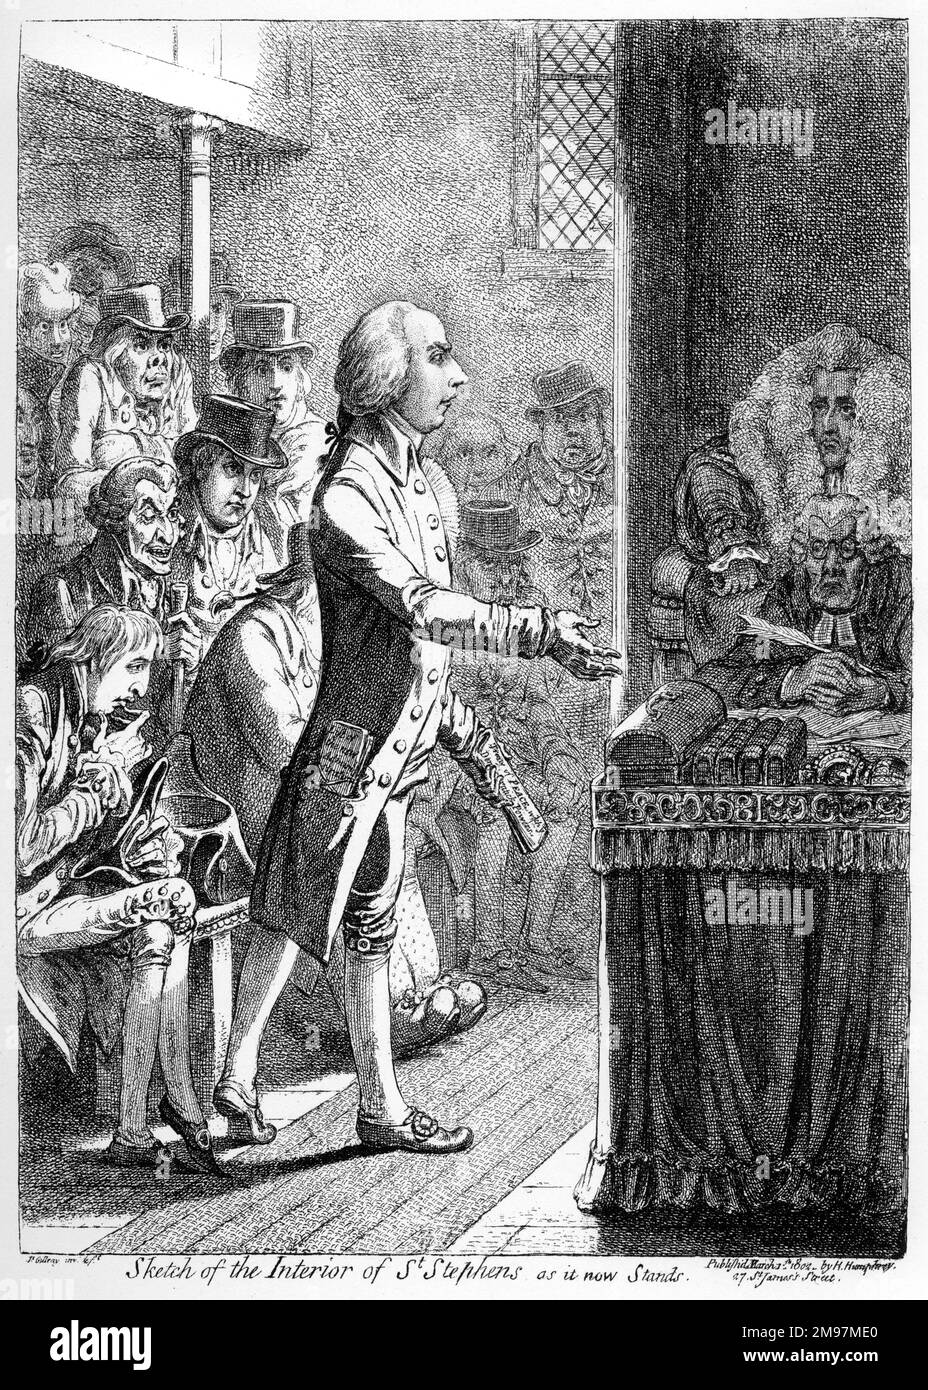 Cartoon, Sketch of the Interior of St Stephens, as it now Stands, by James Gillray.  Showing a view of the House of Commons with ministerial benches on the left and the Speaker and clerk on the right. The man on his feet is the new Prime Minister, Henry Addington, who was opposed to the abolition of slavery and Catholic emancipation. Stock Photo